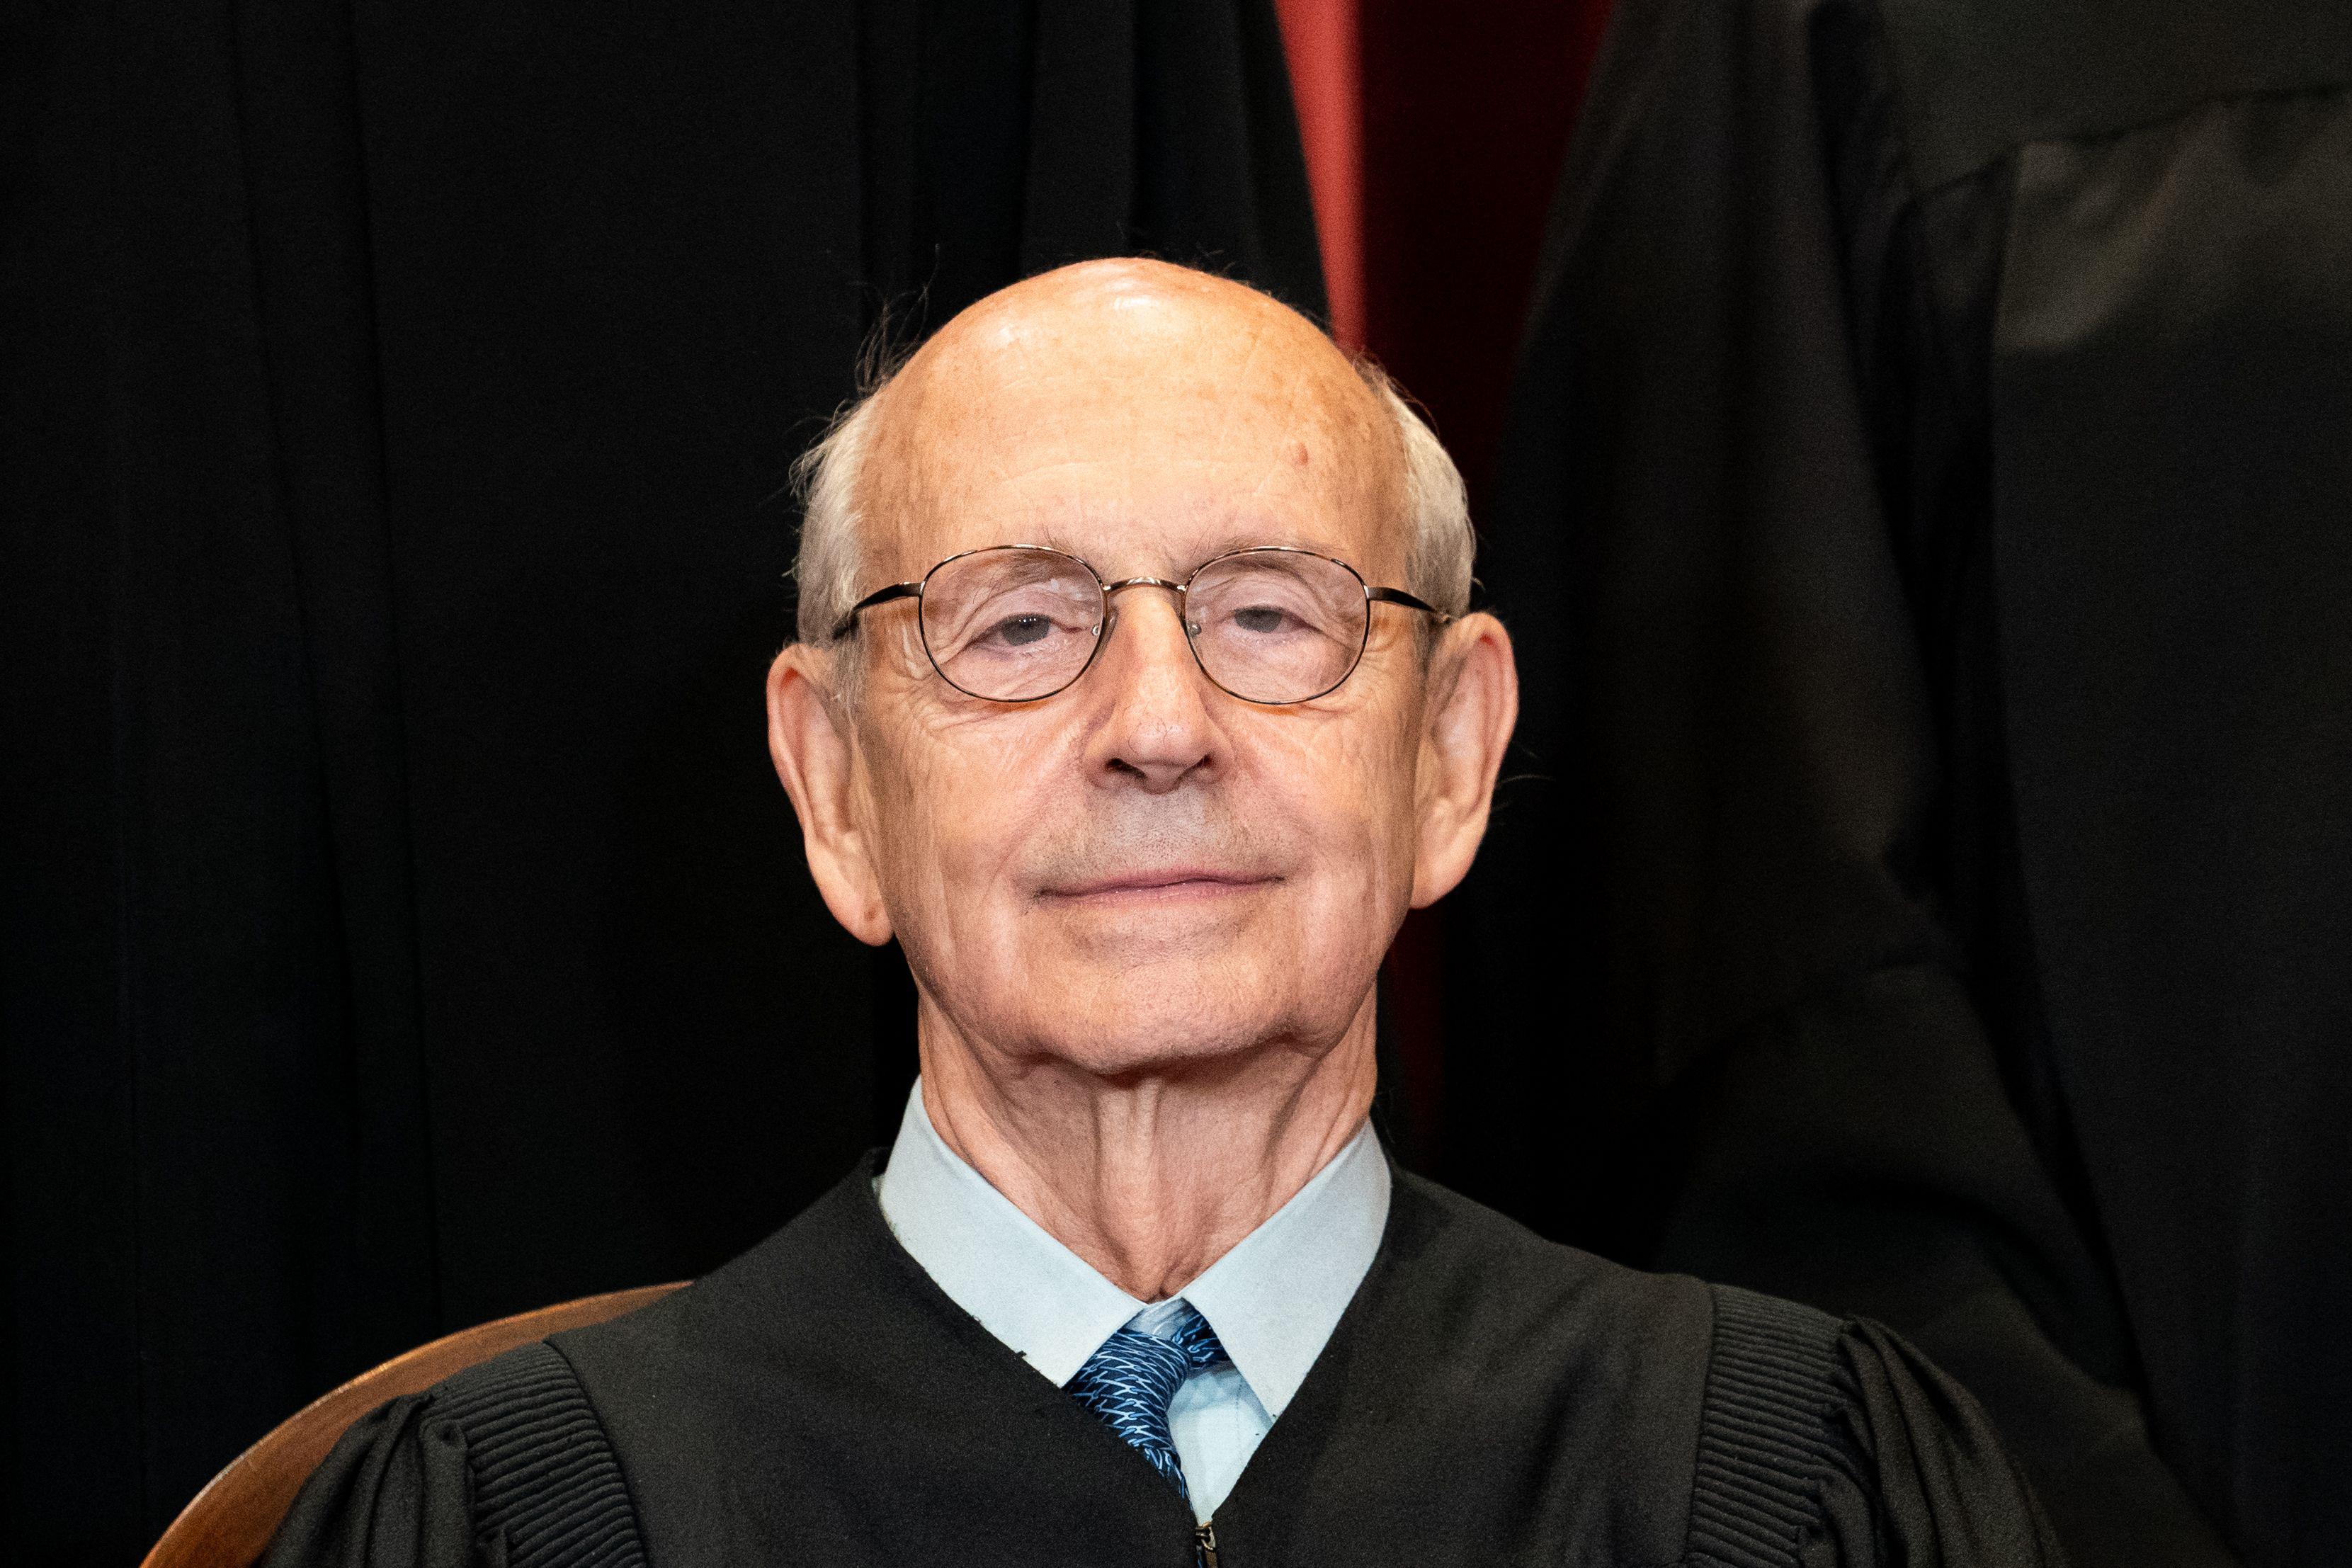 Associate Justice Stephen Breyer sits during a group photo of the Justices at the Supreme Court in Washington, D.C. on April 23, 2021.